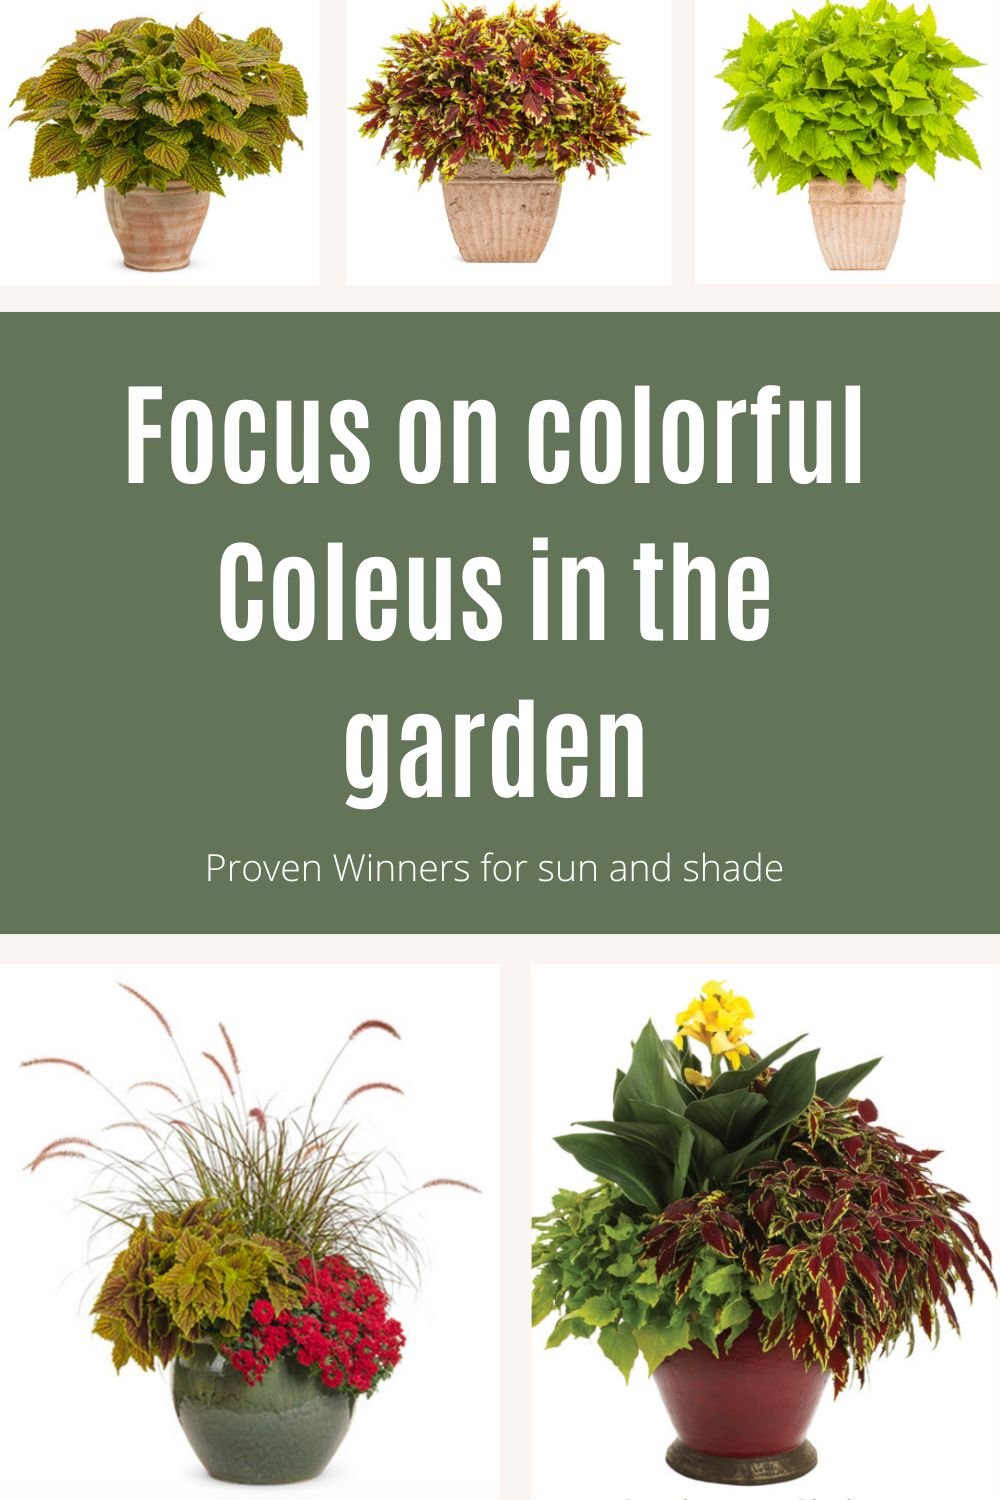 A sampling of Proven Winners Coleus in containers